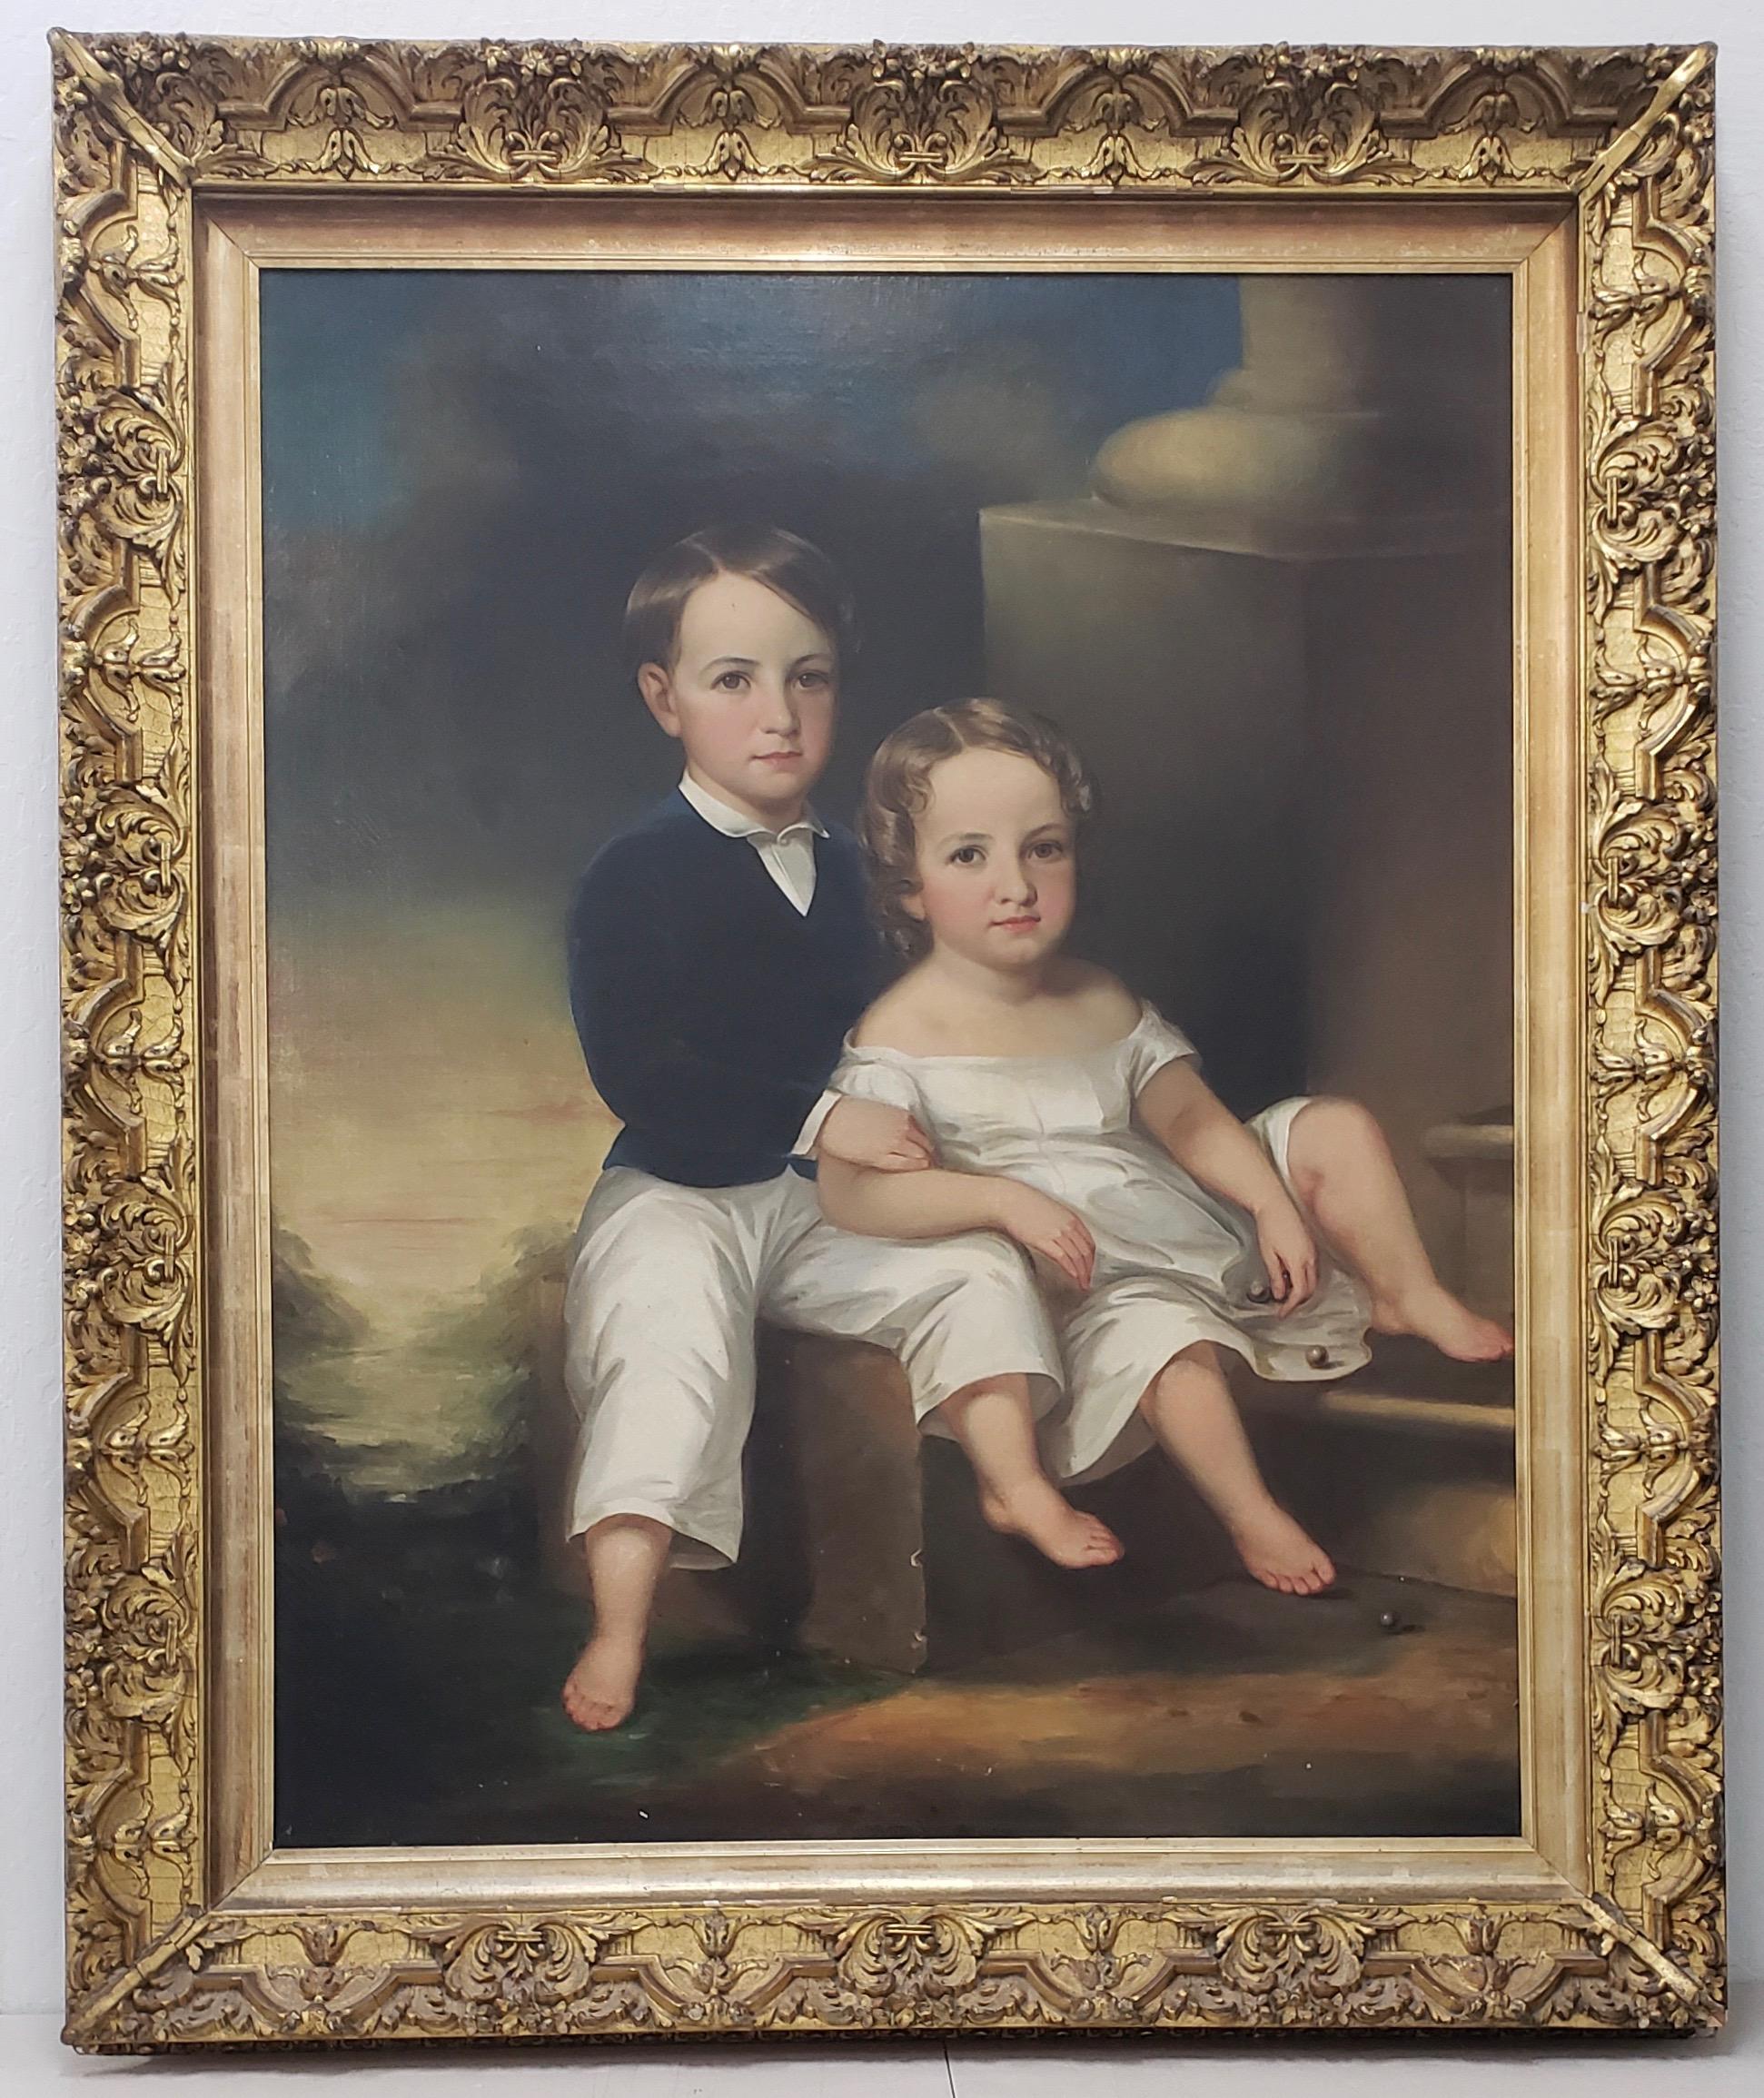 Monumental Mid-19th Century Oil Portrait of Two Siblings